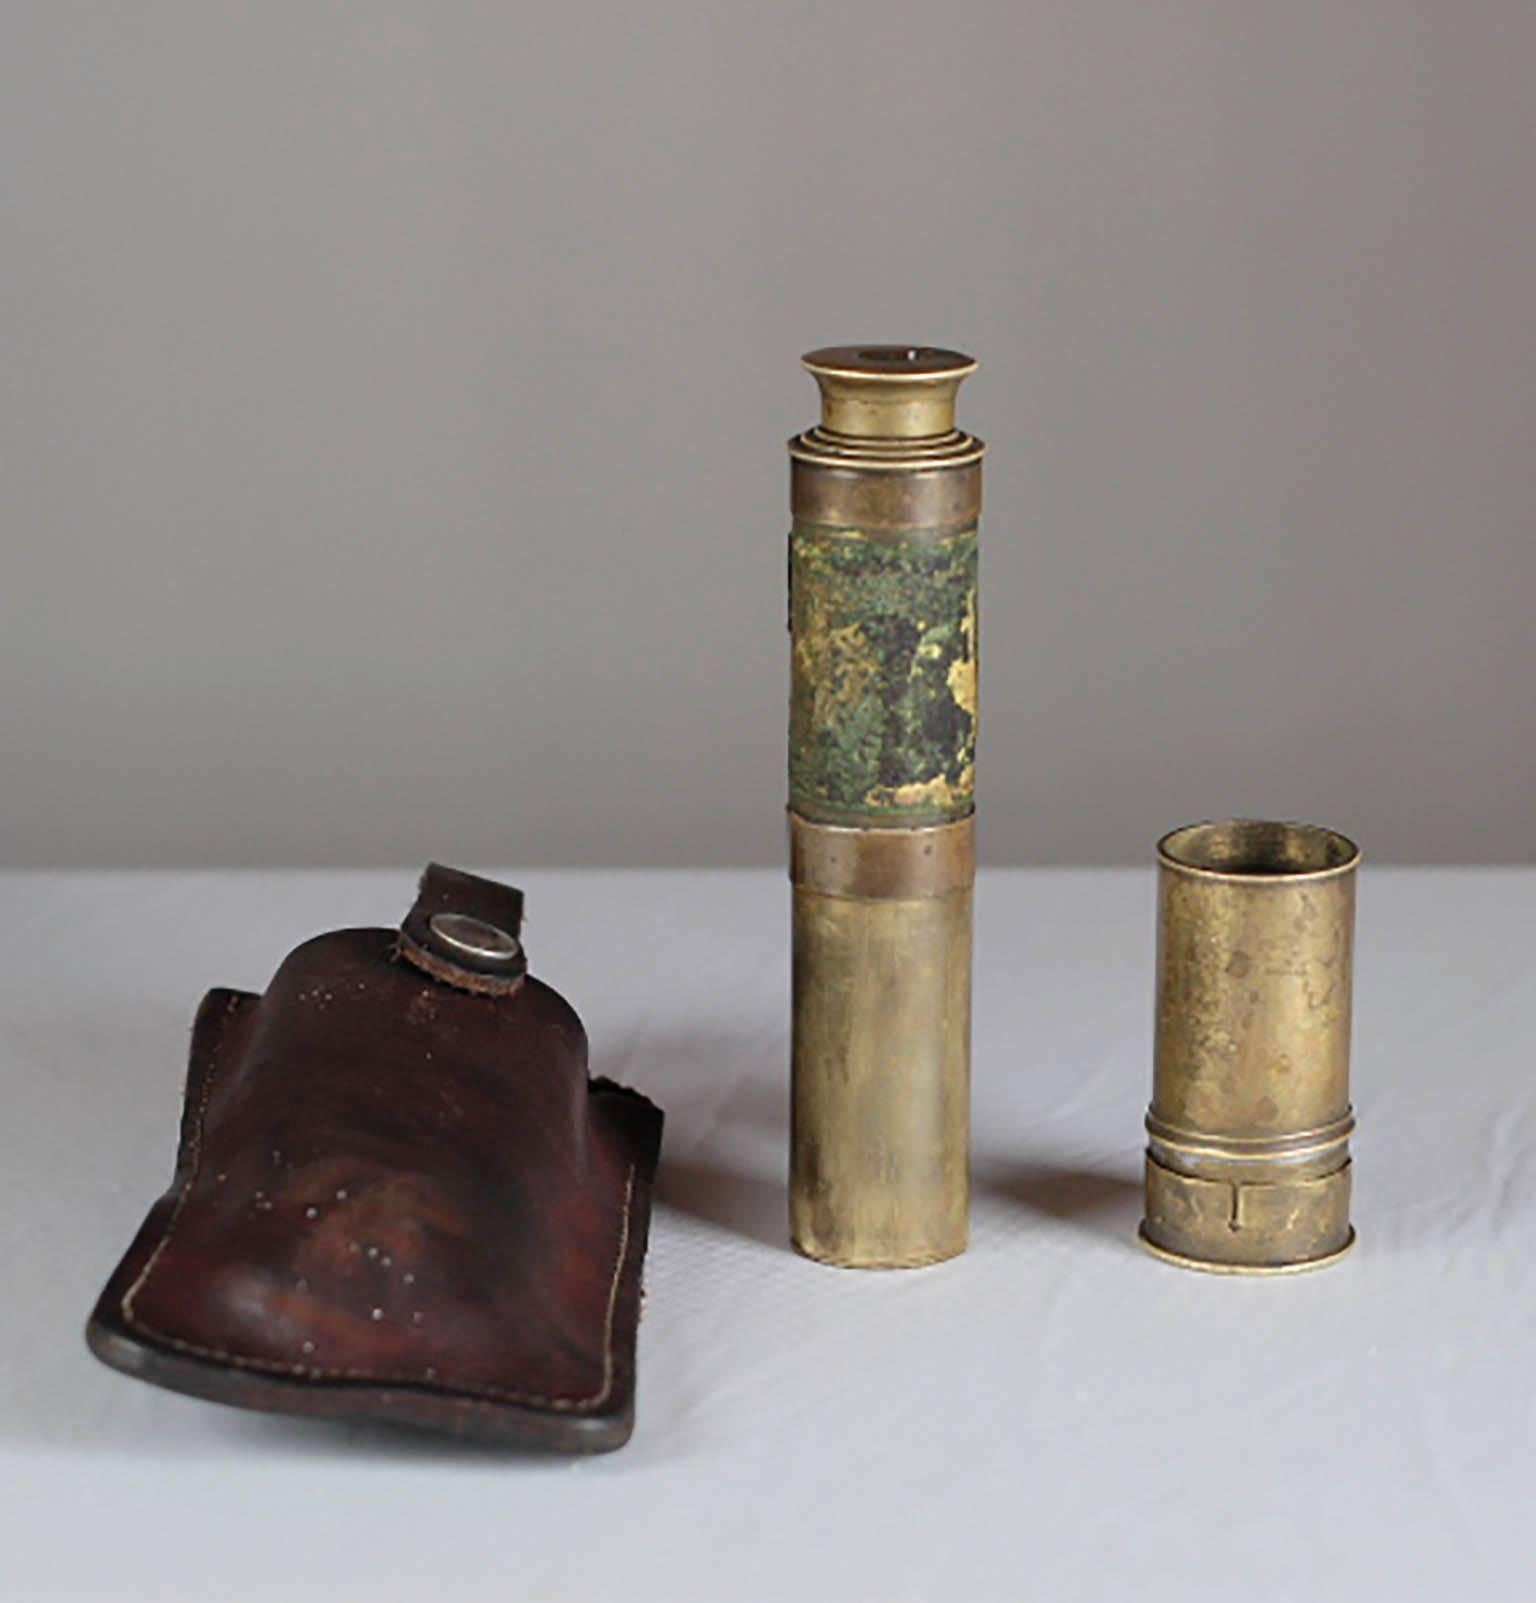 Telescoping brass spyglass with brass cover and leather case. 